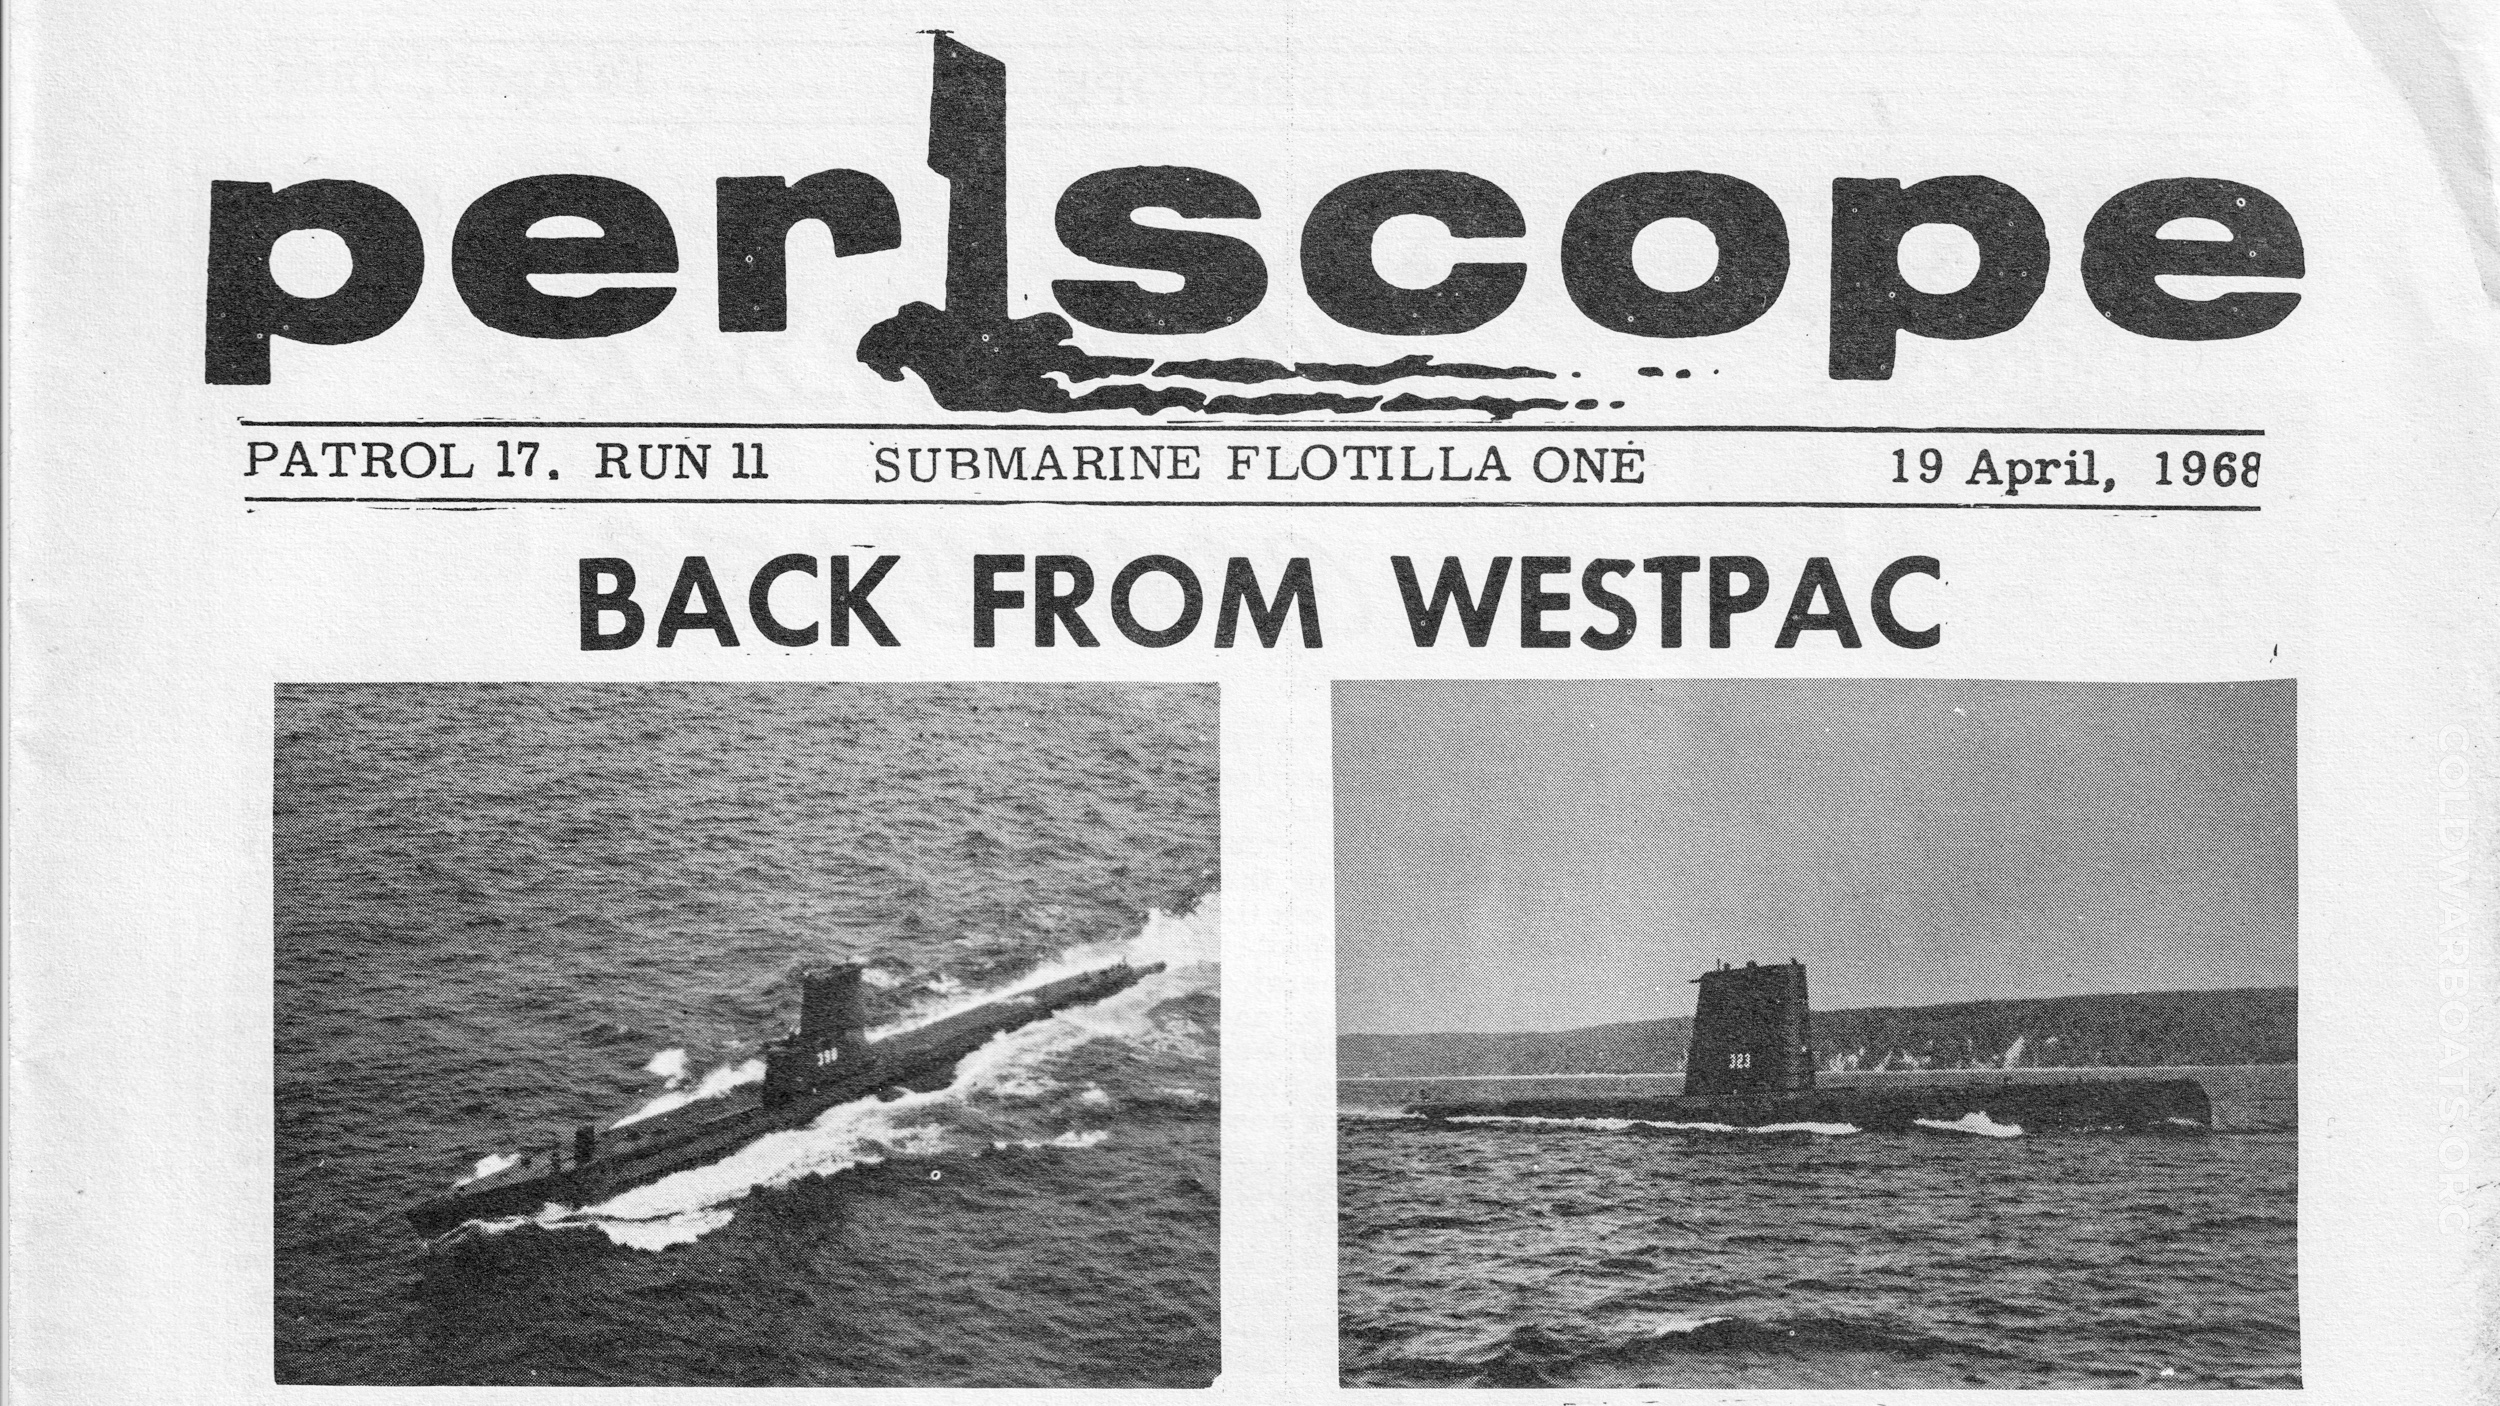 "PERISCOPE" newsletter - 19 APR 1968 by SUBFLOTONE at SUBASE POINT LOMA.